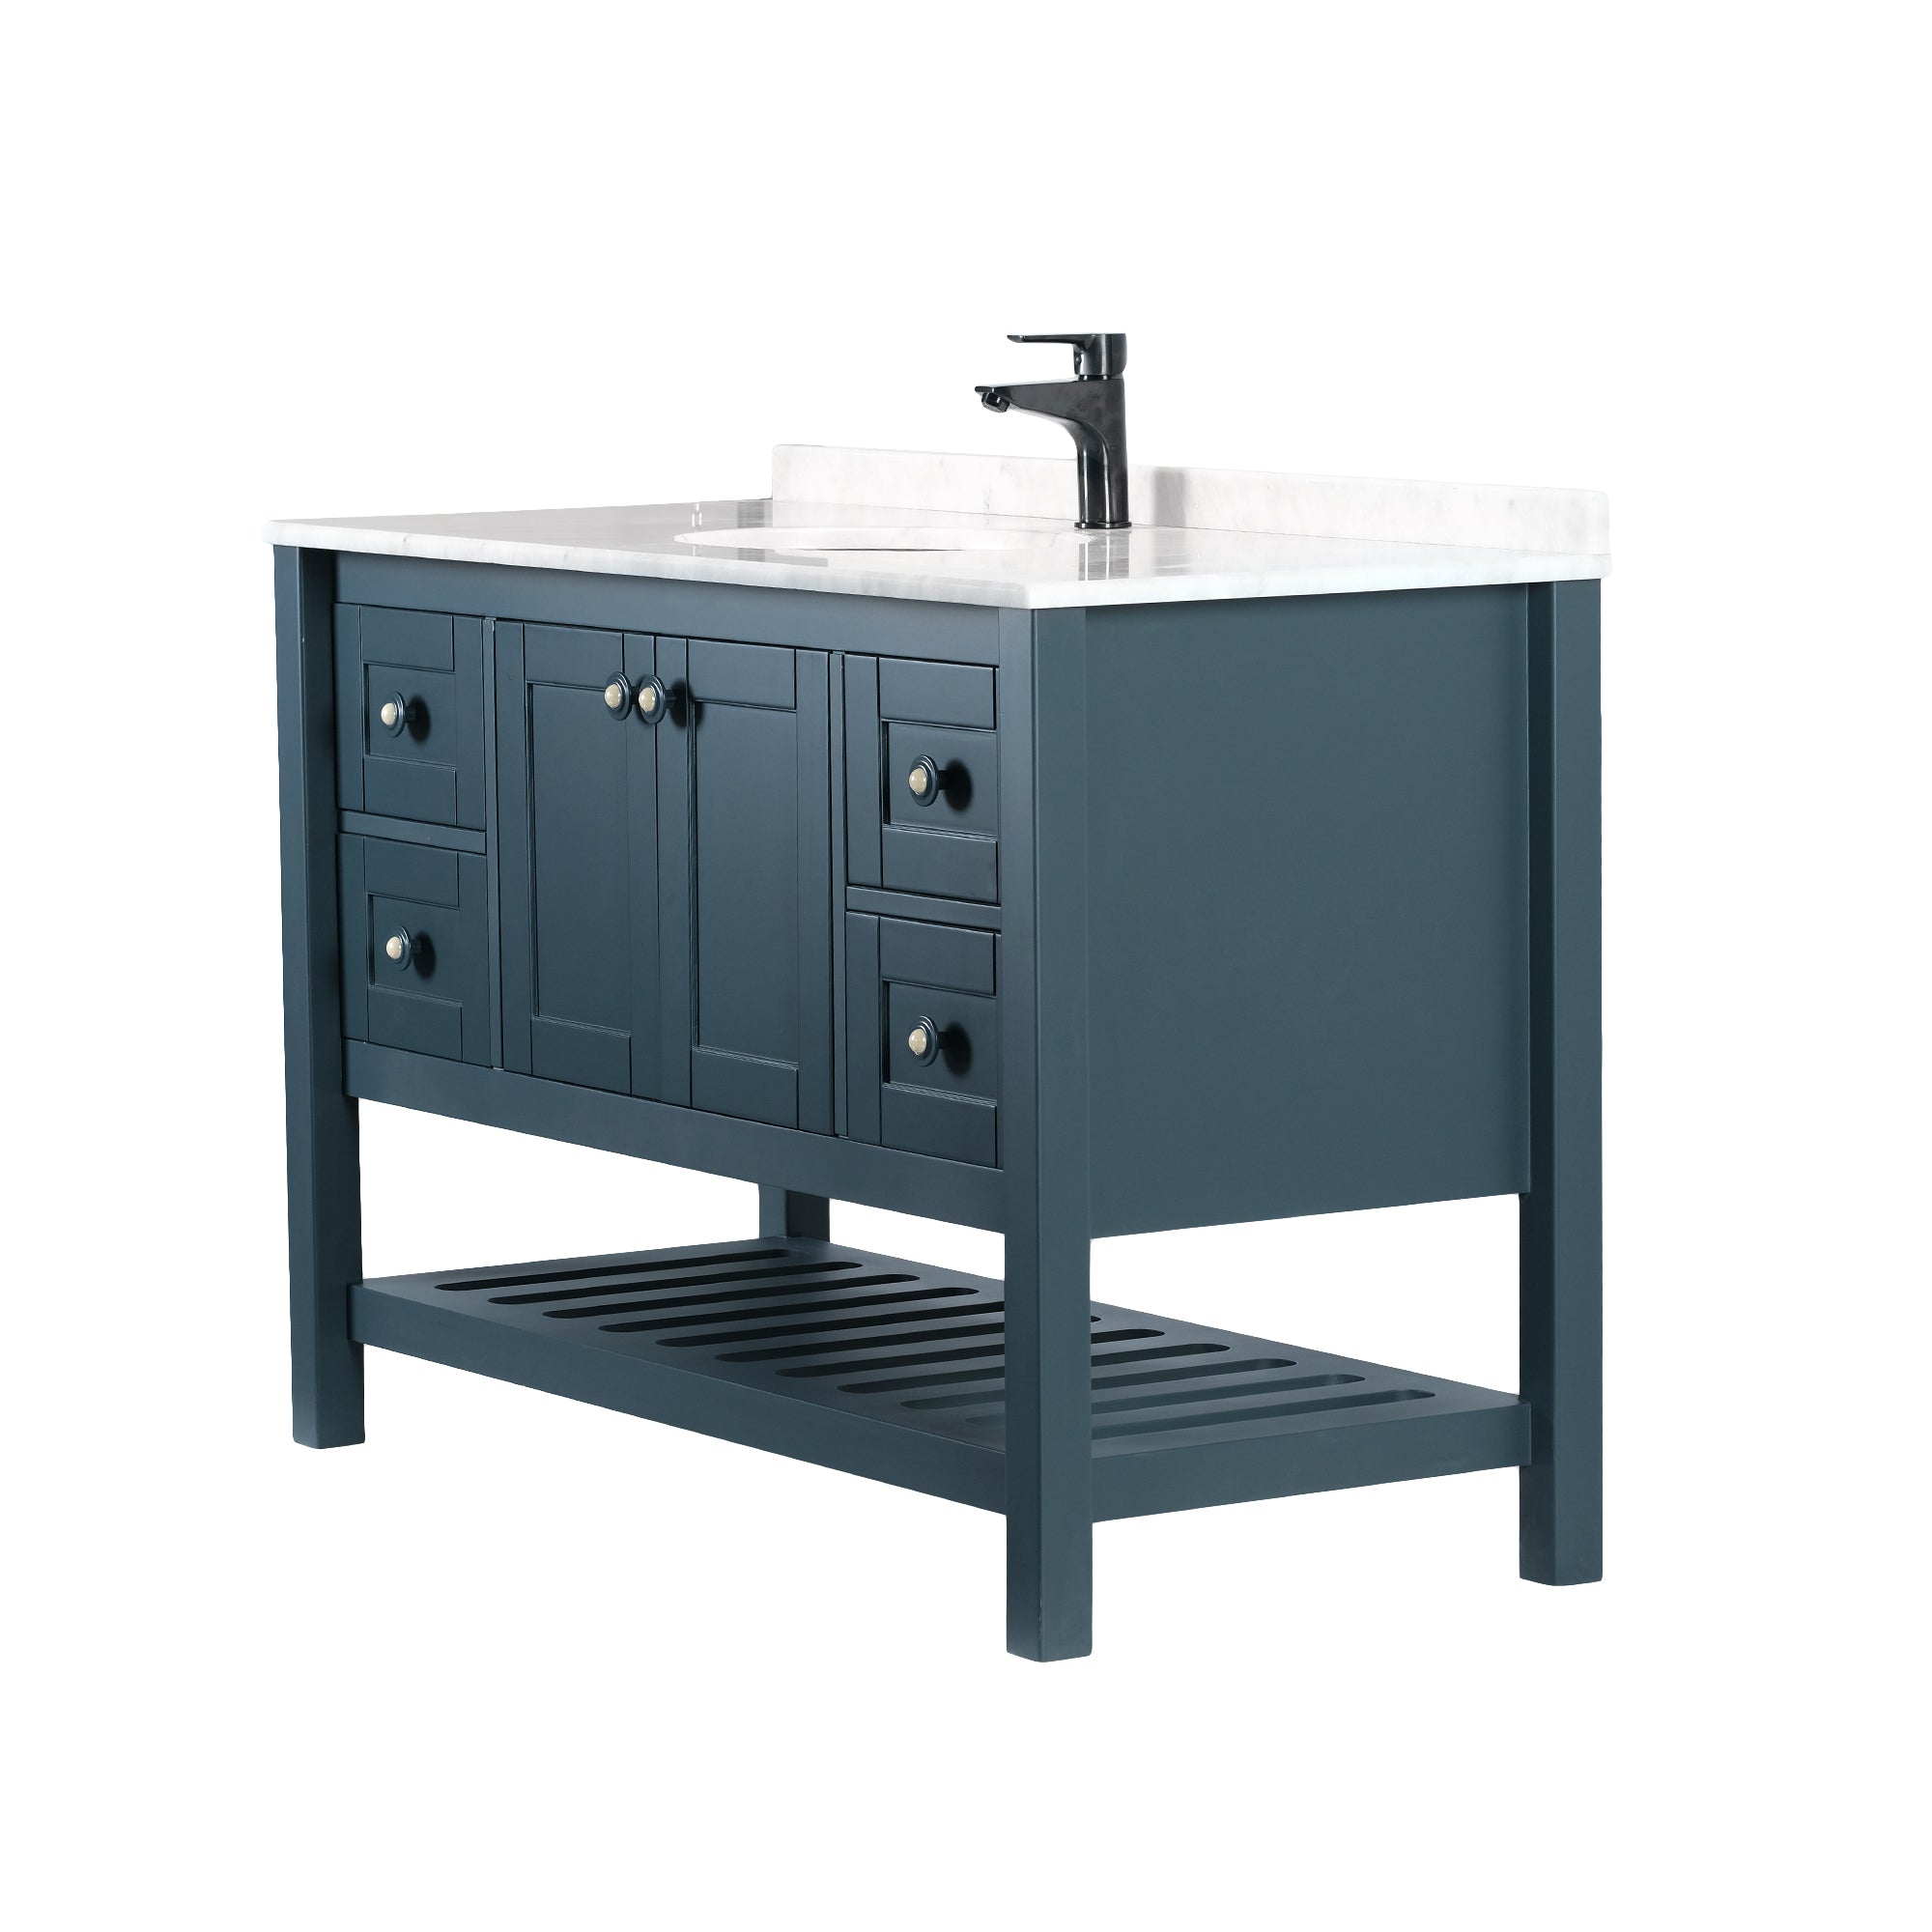 LUCCA 48 INCH FREE STANDING VANITY AND SINK COMBO - CHARCOAL GRAY